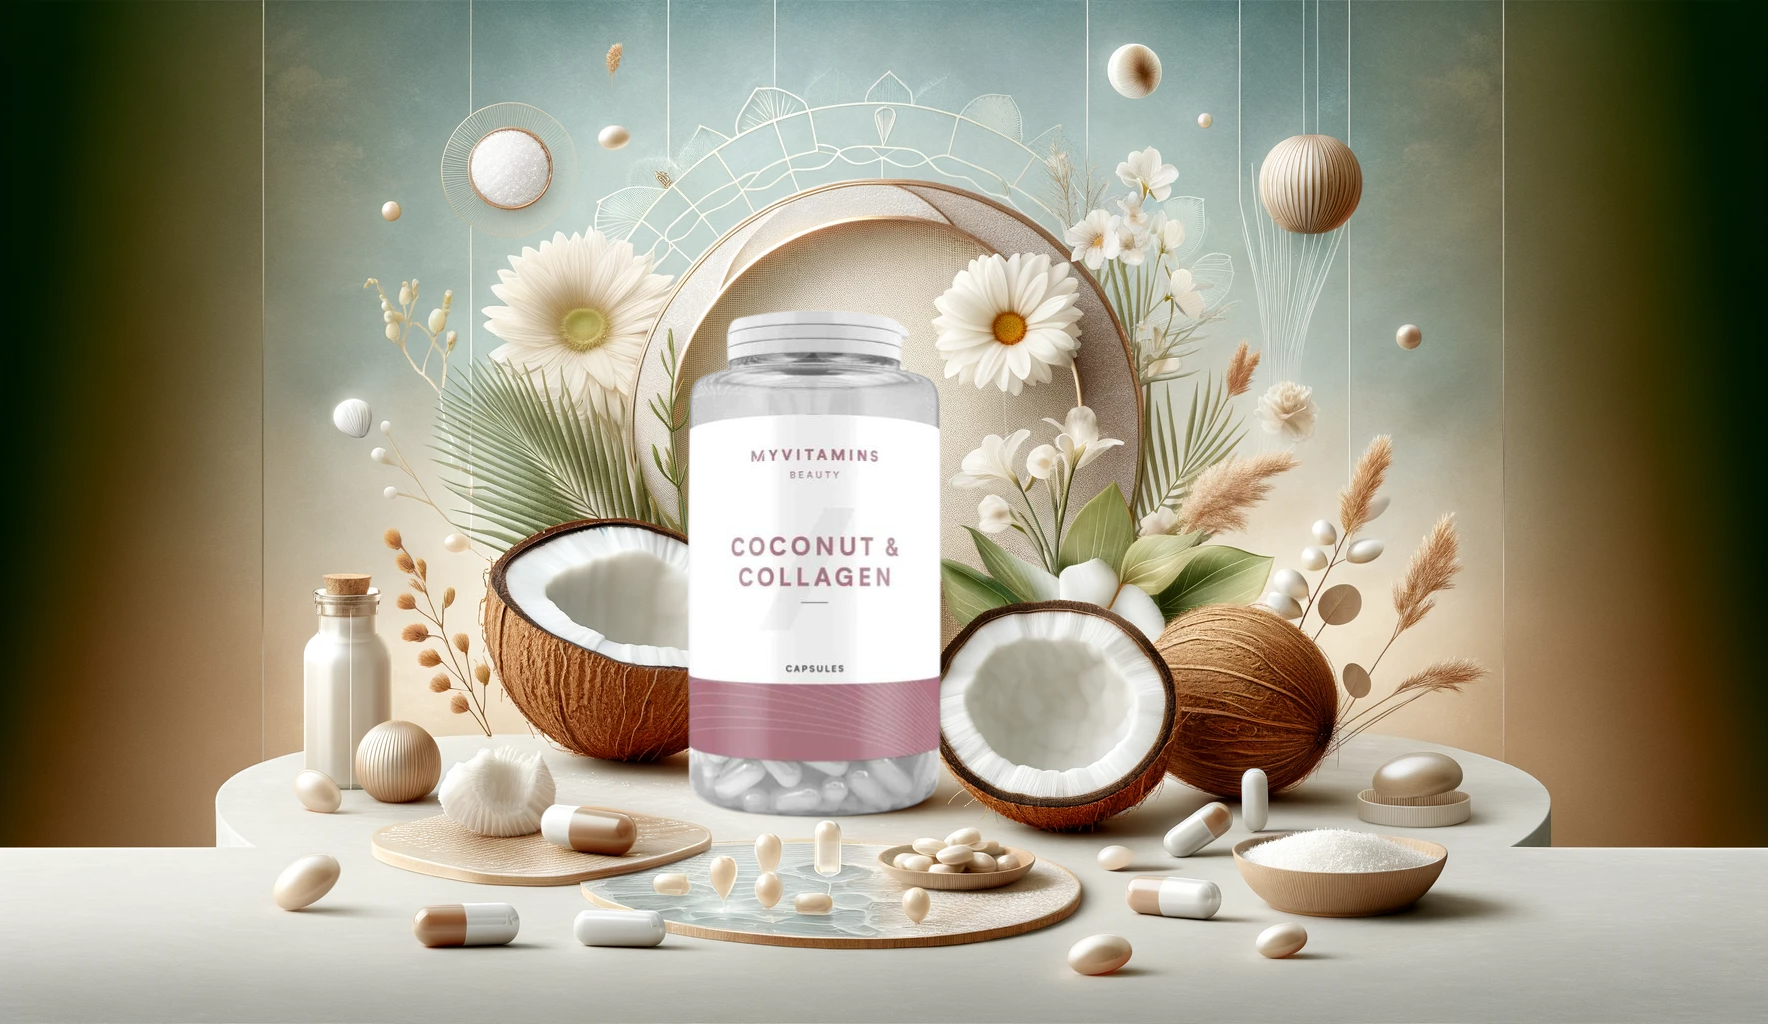 Header image for MyVitamins Coconut & Collagen Capsules blog, featuring a bottle of the capsules with coconut and collagen elements, against a soft natural-toned background with floral motifs, symbolizing natural wellness and beauty